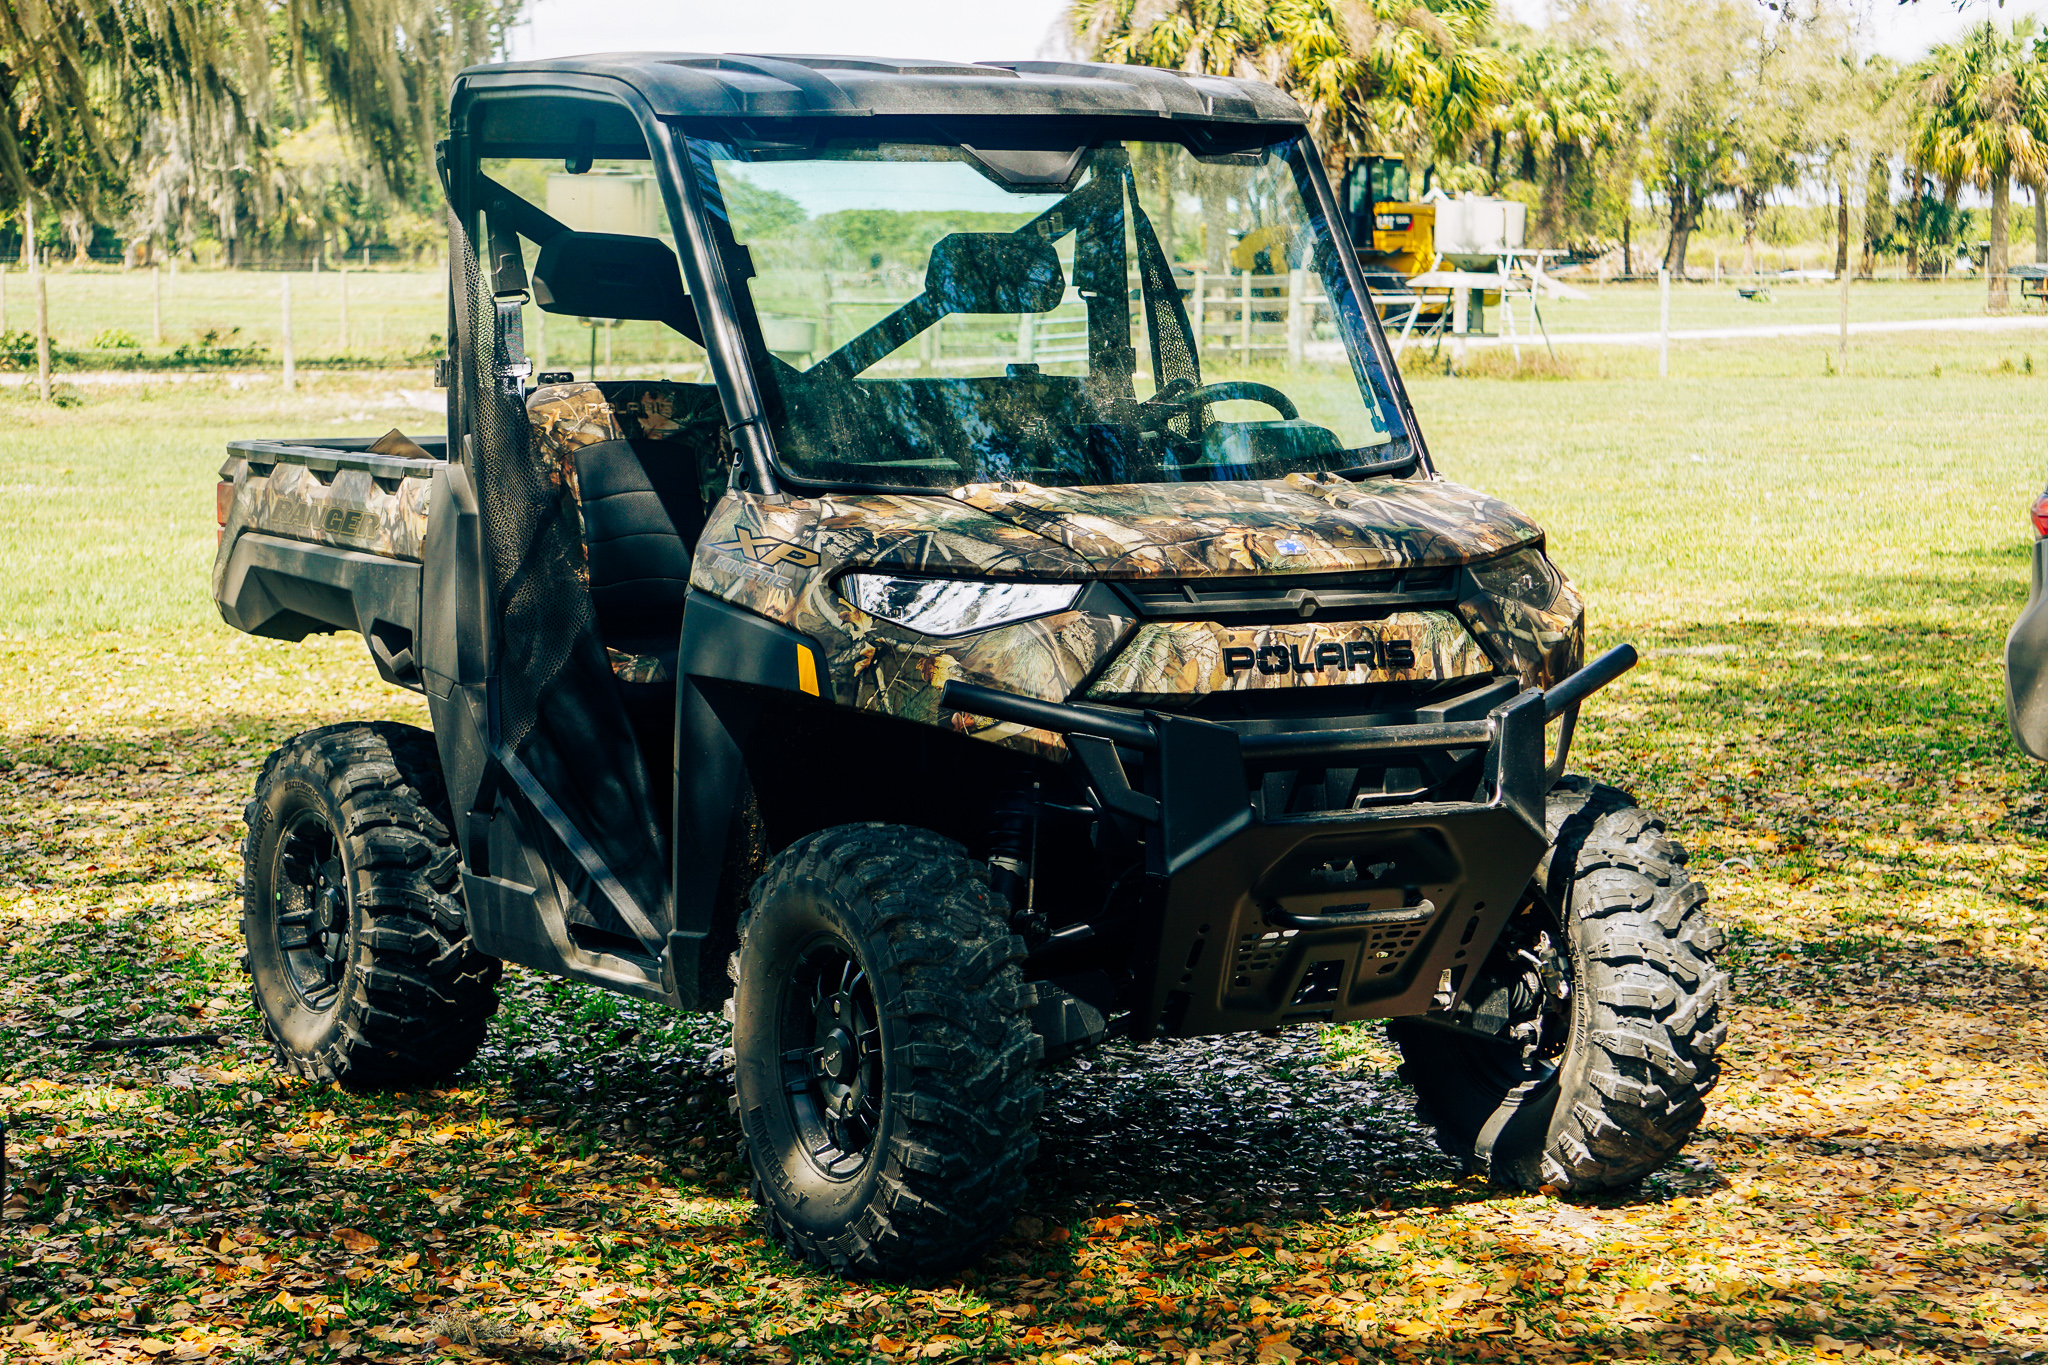 The Ranger Kinetic Is The Electric UTV Hunters Want Outdoor Life